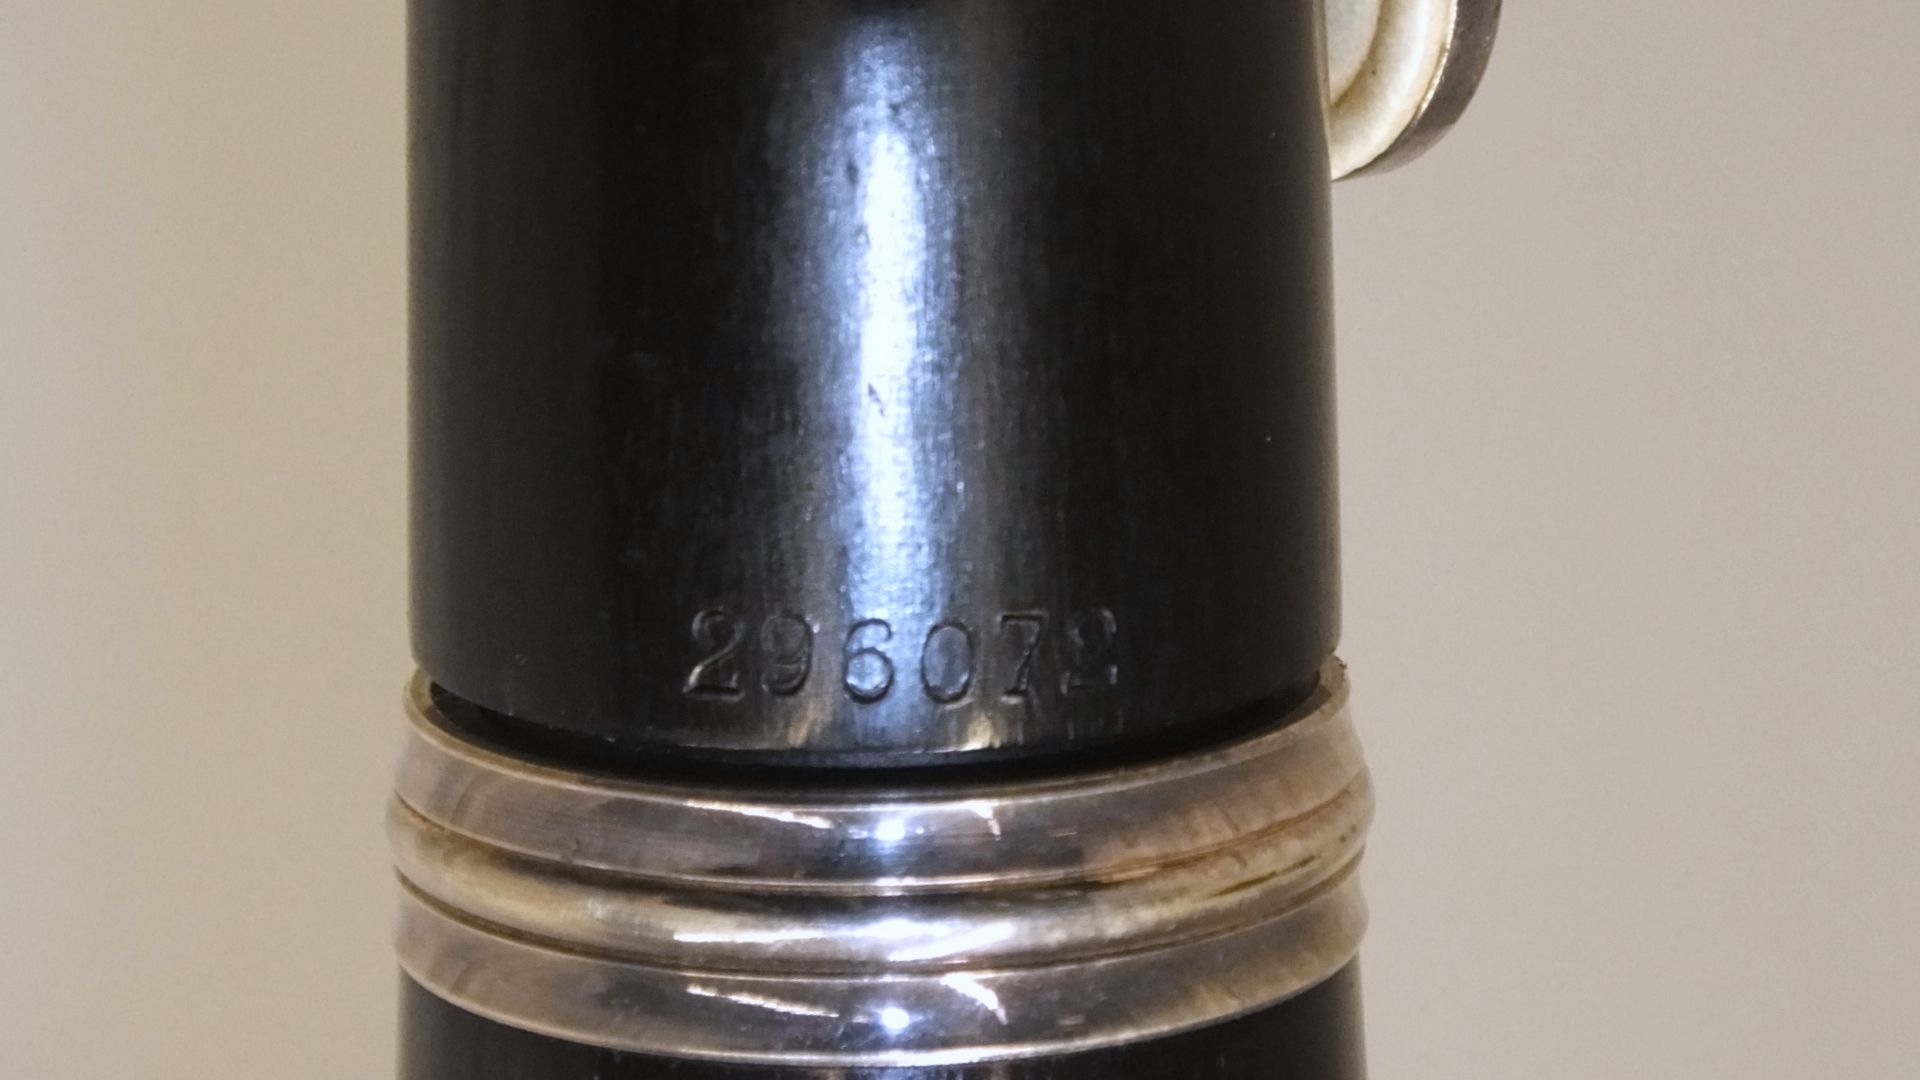 Buffet Crampon Clarinet (A) - Serial Number - 296072 - Image 9 of 10